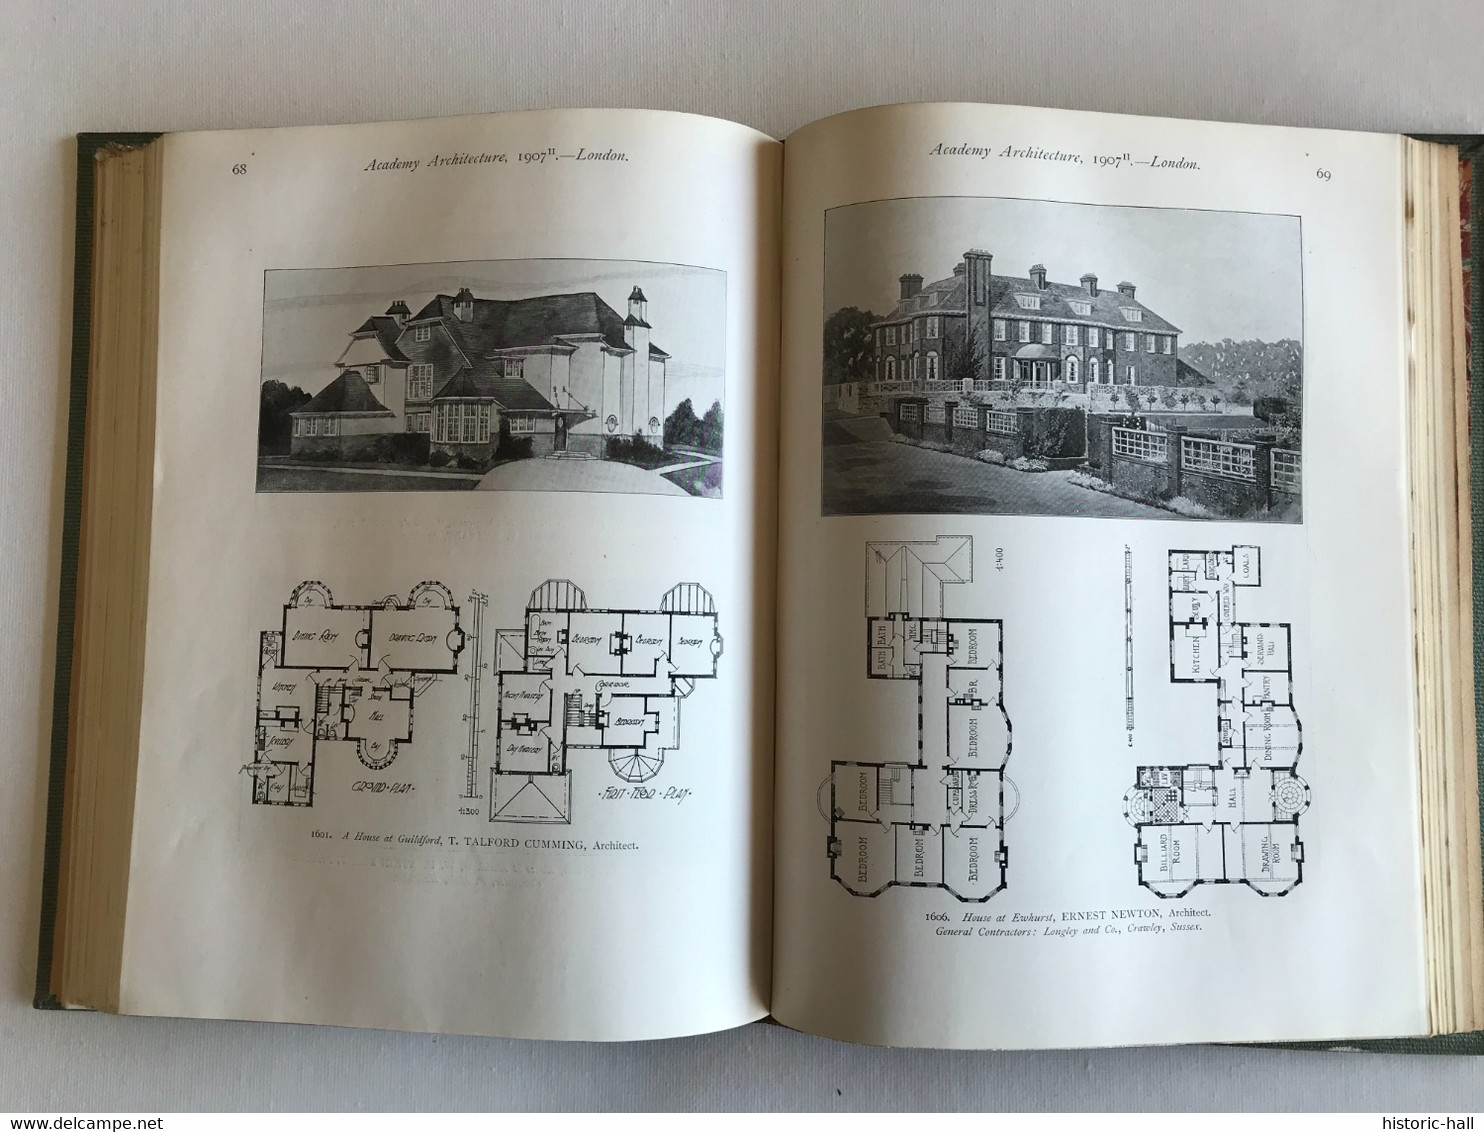 ACADEMY ARCHITECTURE & Architectural Review - vol 31 & 32 - 1907 - Alexander KOCH